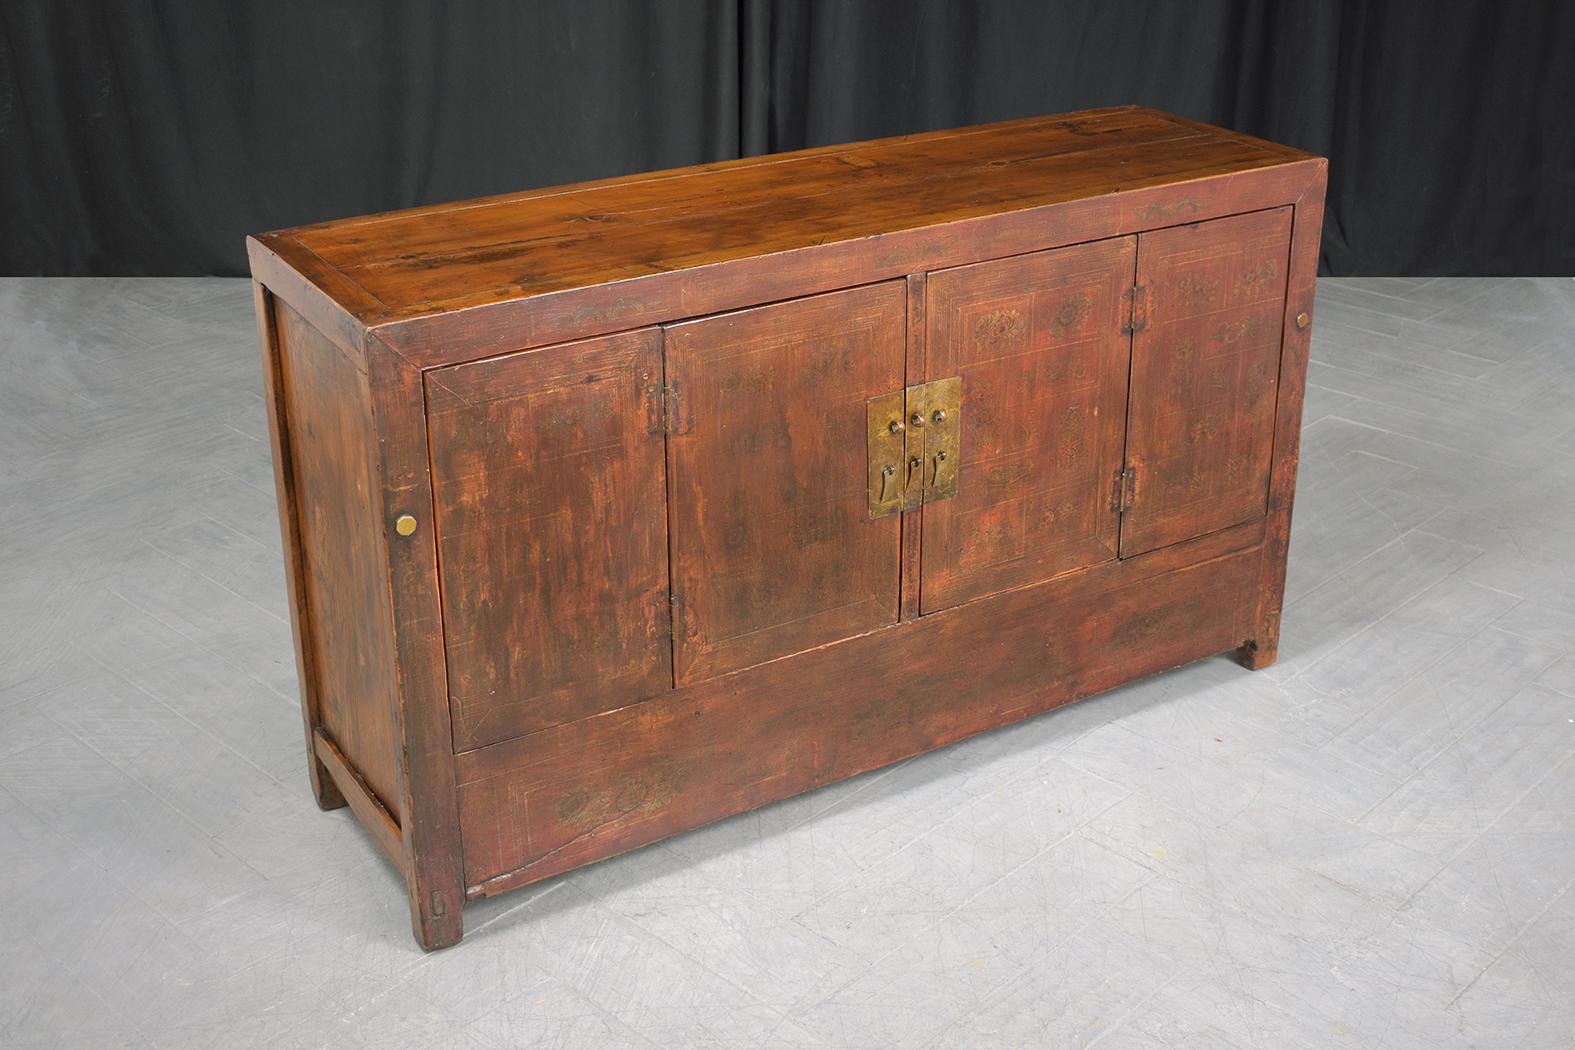 1980s Vintage Chinese Elm Wood Sideboard: Hand-Painted Floral & Brass Accents For Sale 6